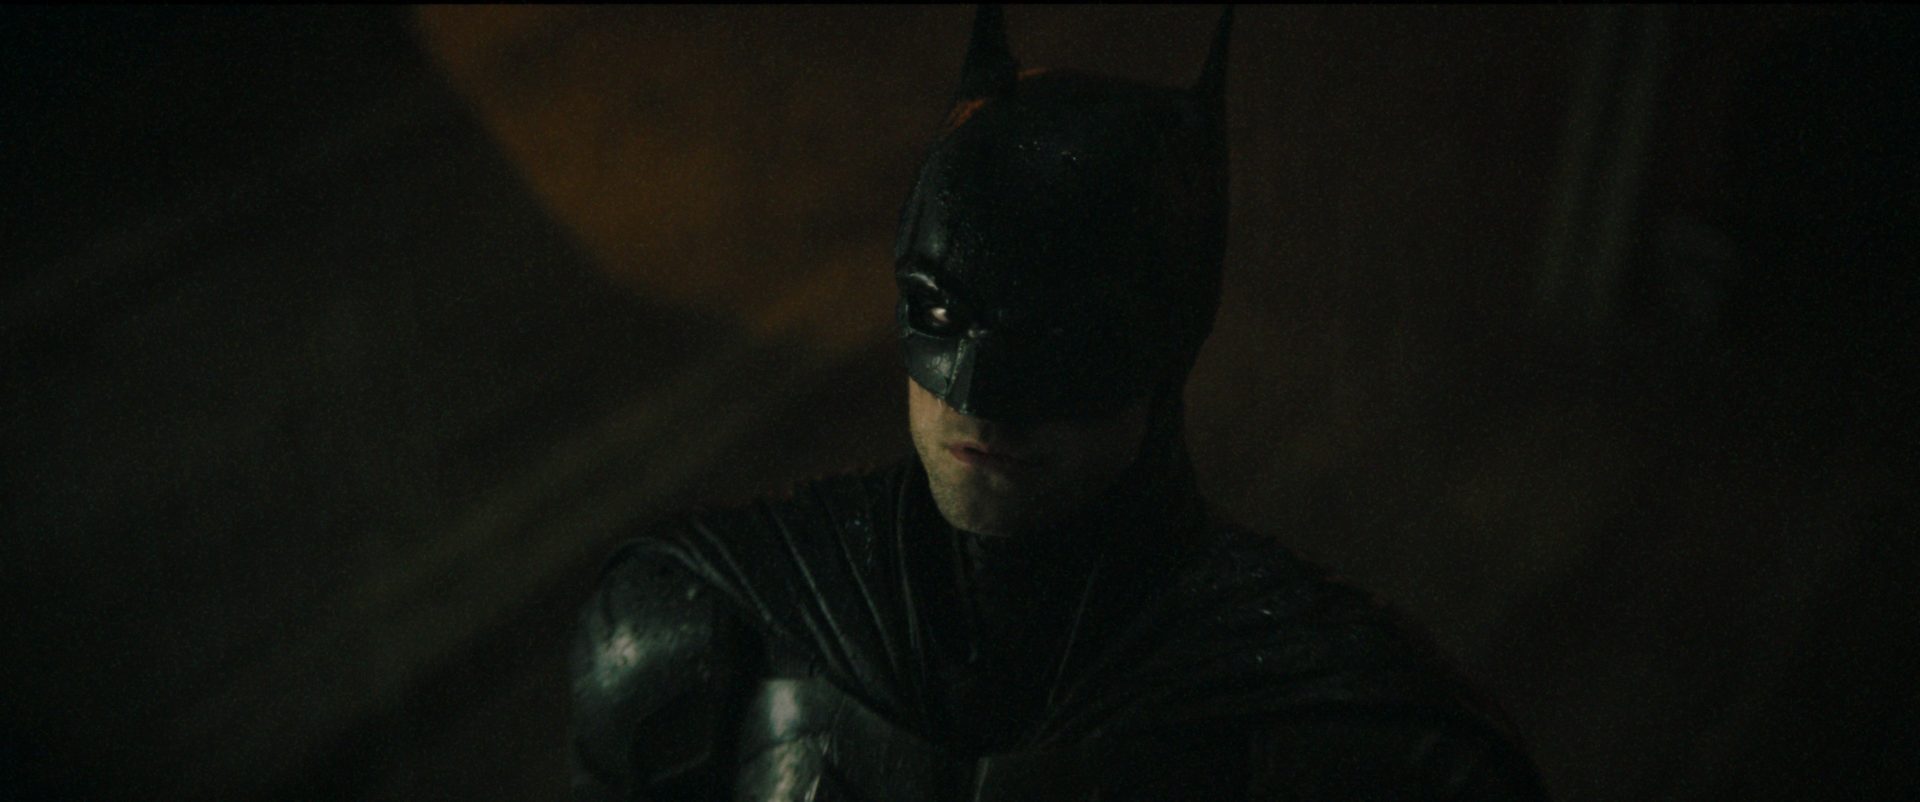 Robert Pattinson’s Batman Trailer Parts Be troubled, Fireplace, and a Slowed-Down Nirvana Tune